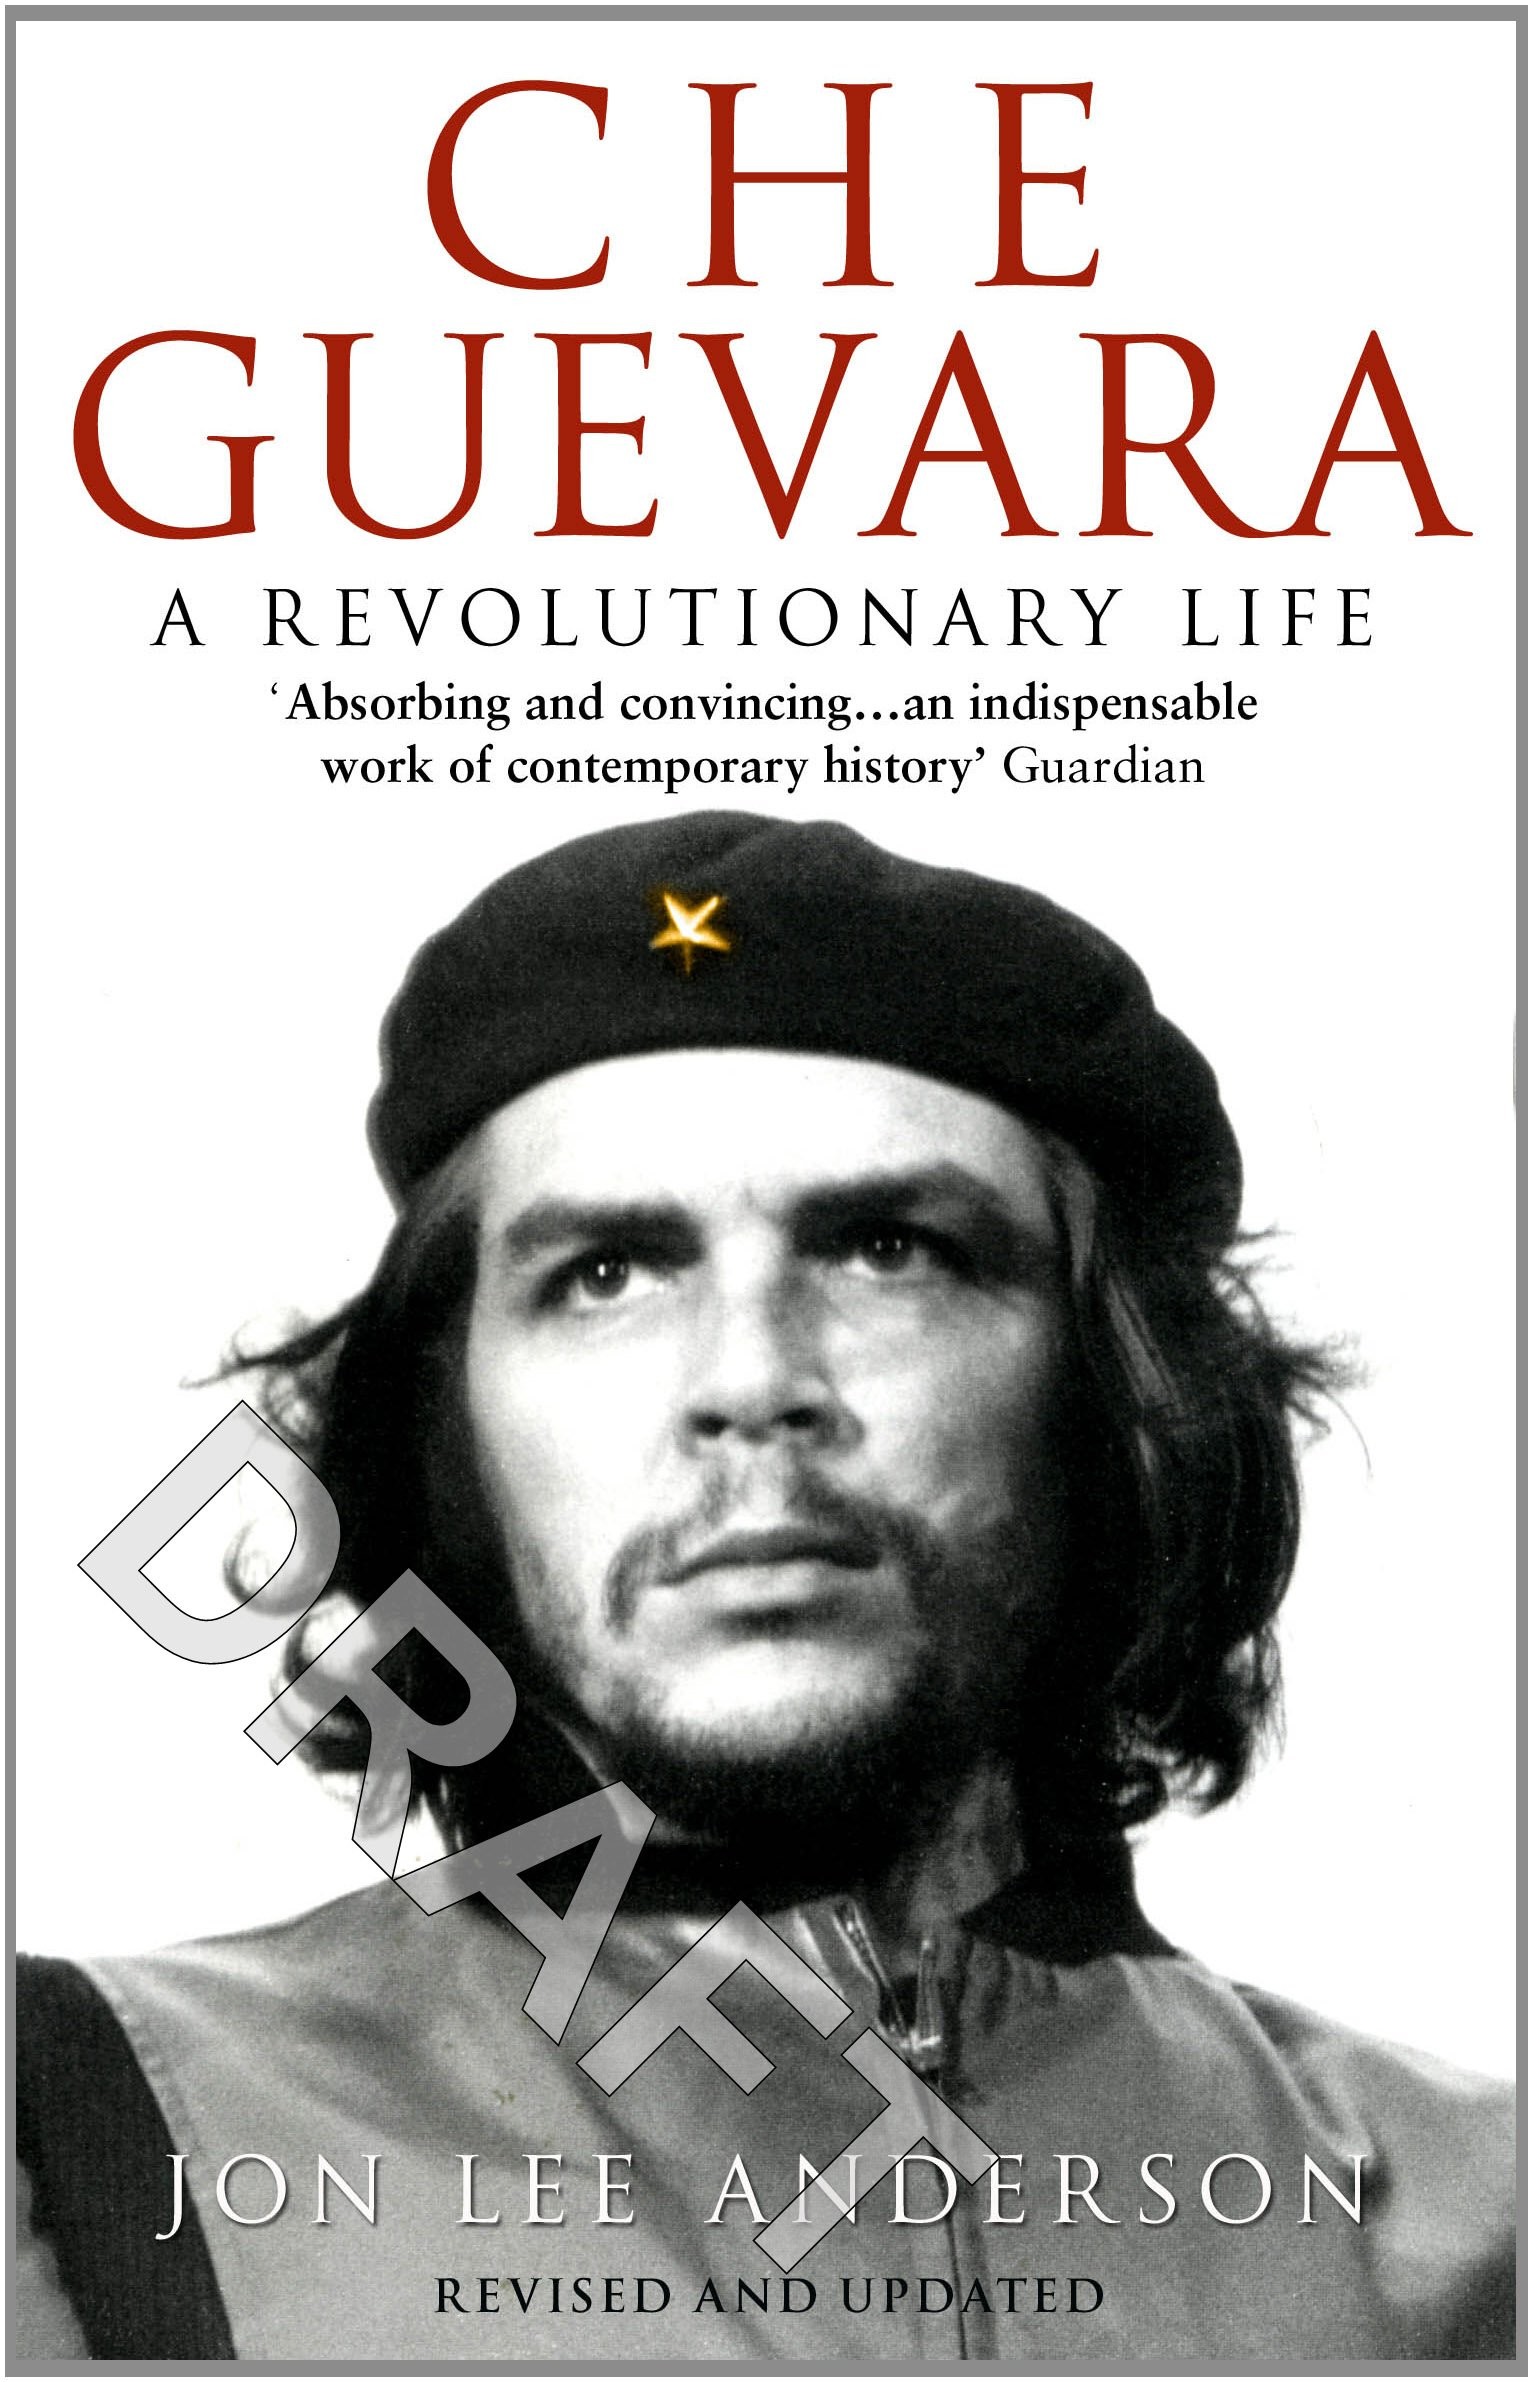 1533x2382 Buy Che Guevara Book Online at Low Prices in India | Che Guevara Reviews &  Ratings - Amazon.in